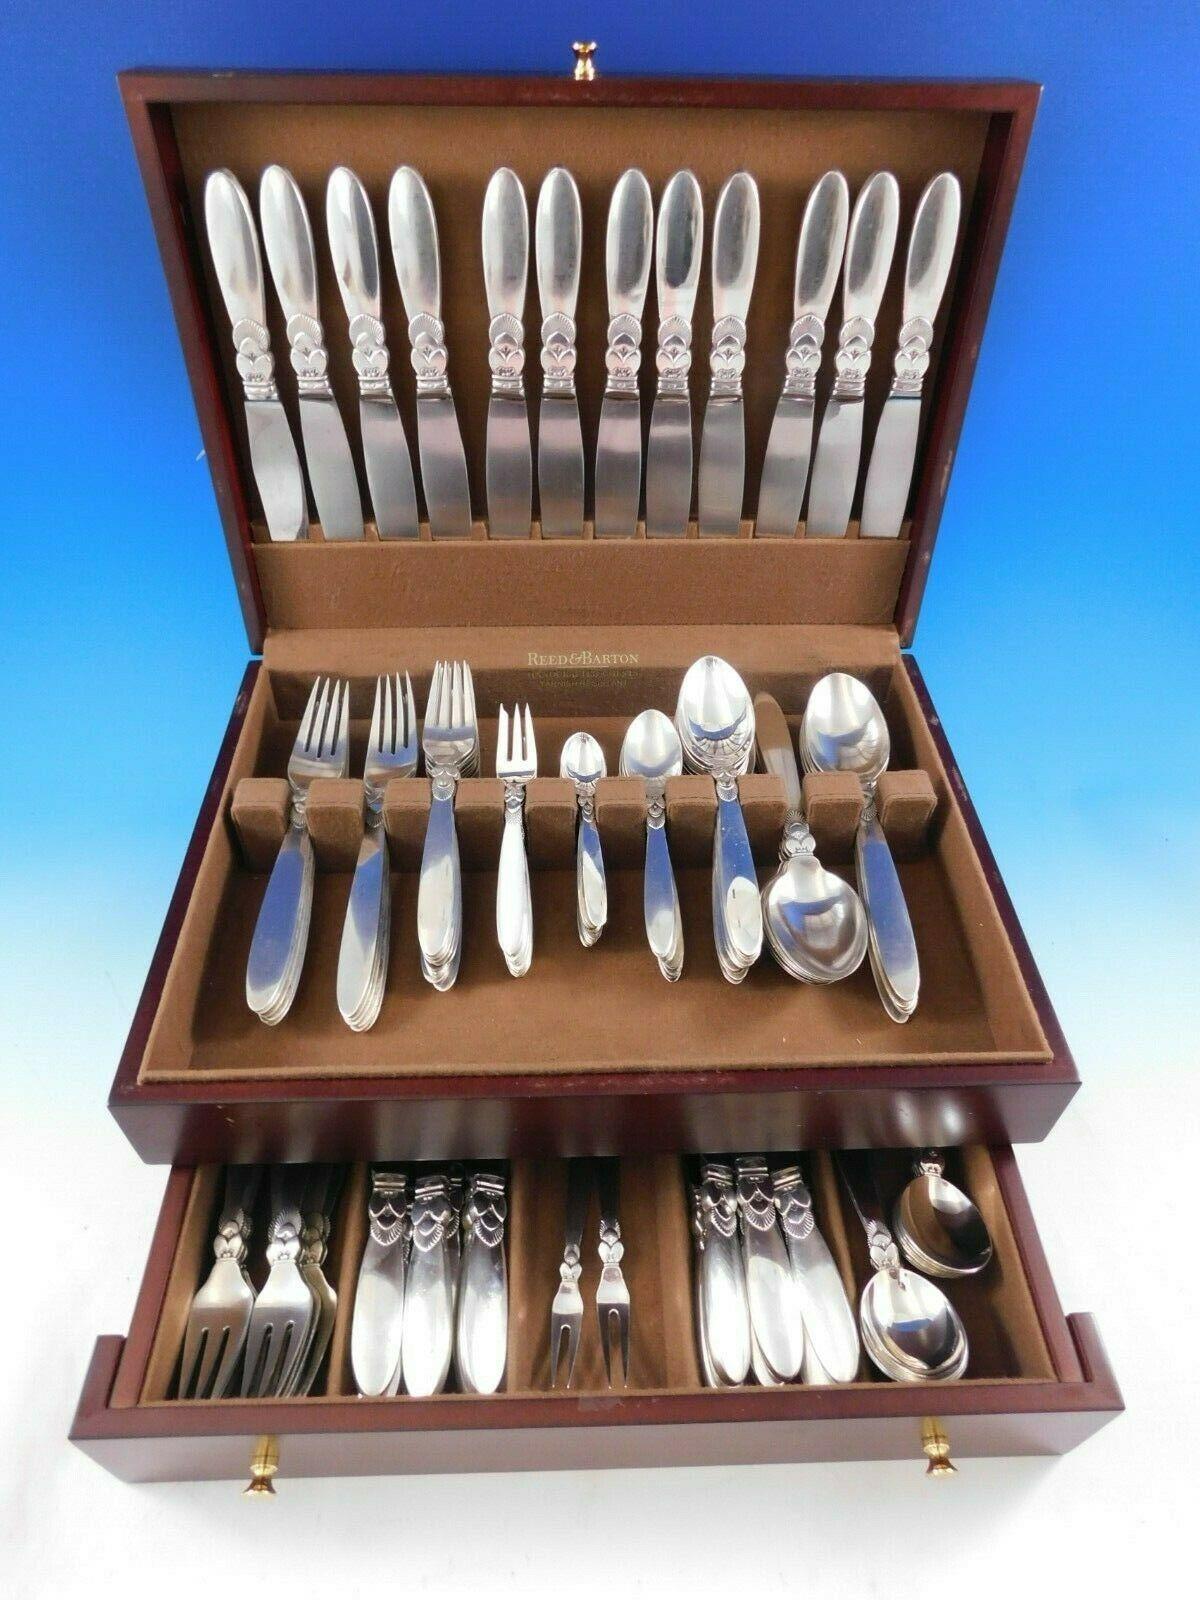 Outstanding cactus by Georg Jensen Danish sterling silver flatware set - 134 pieces. This set includes:

12 dinner knives, short handle, 9 1/4